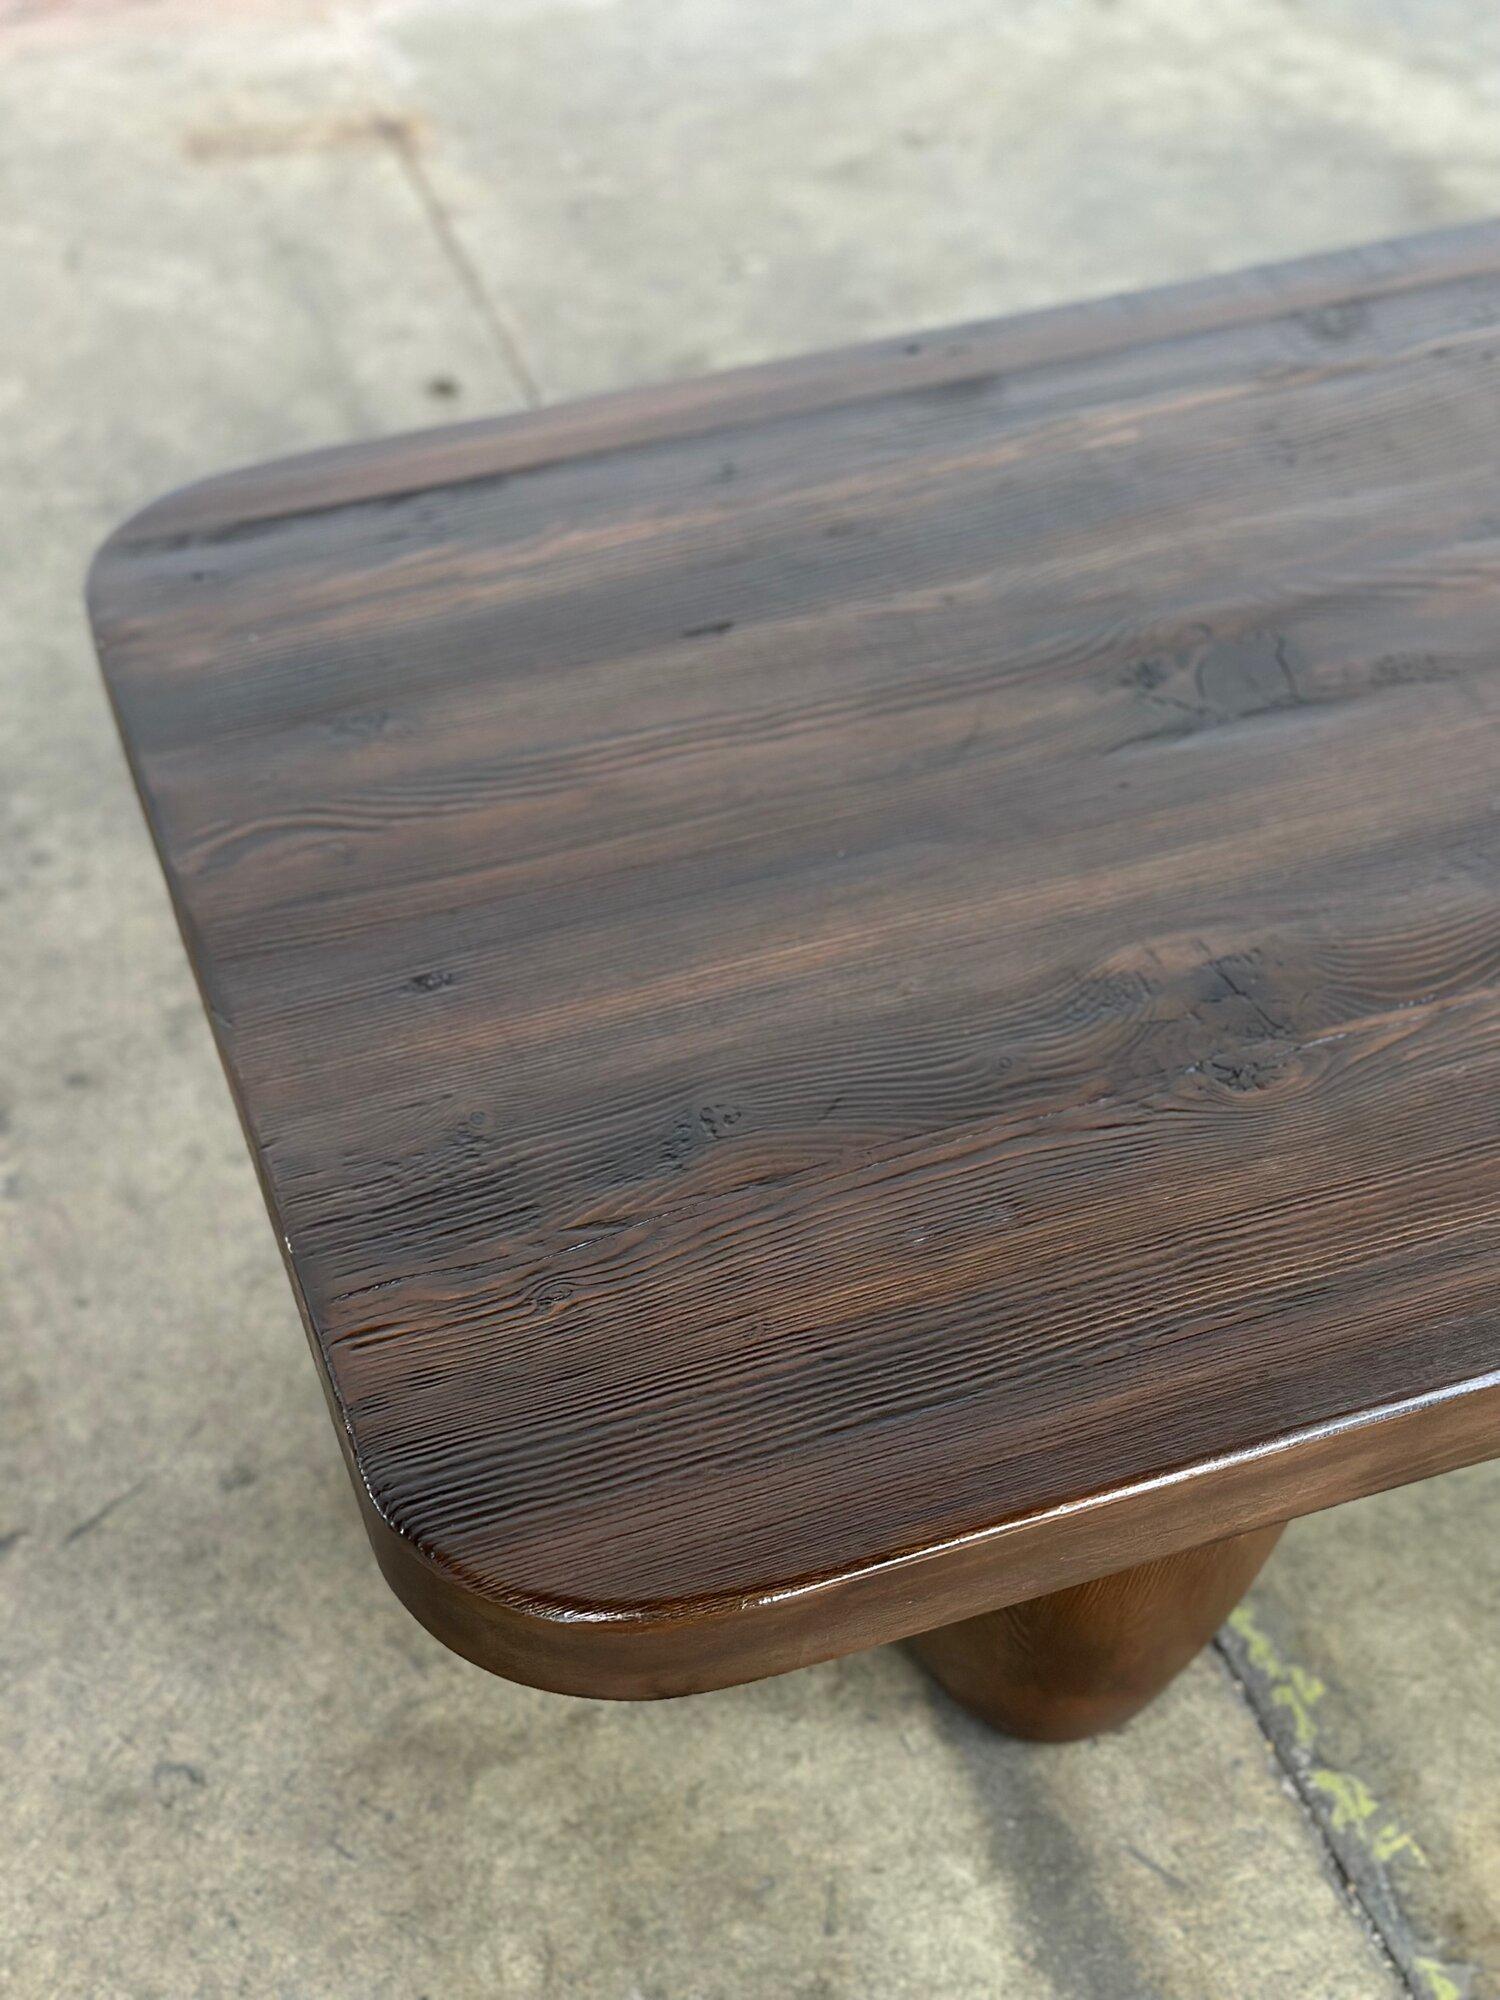 Wood “Theo” Primitive Coffee Table by Six Penny- Ebony Stain